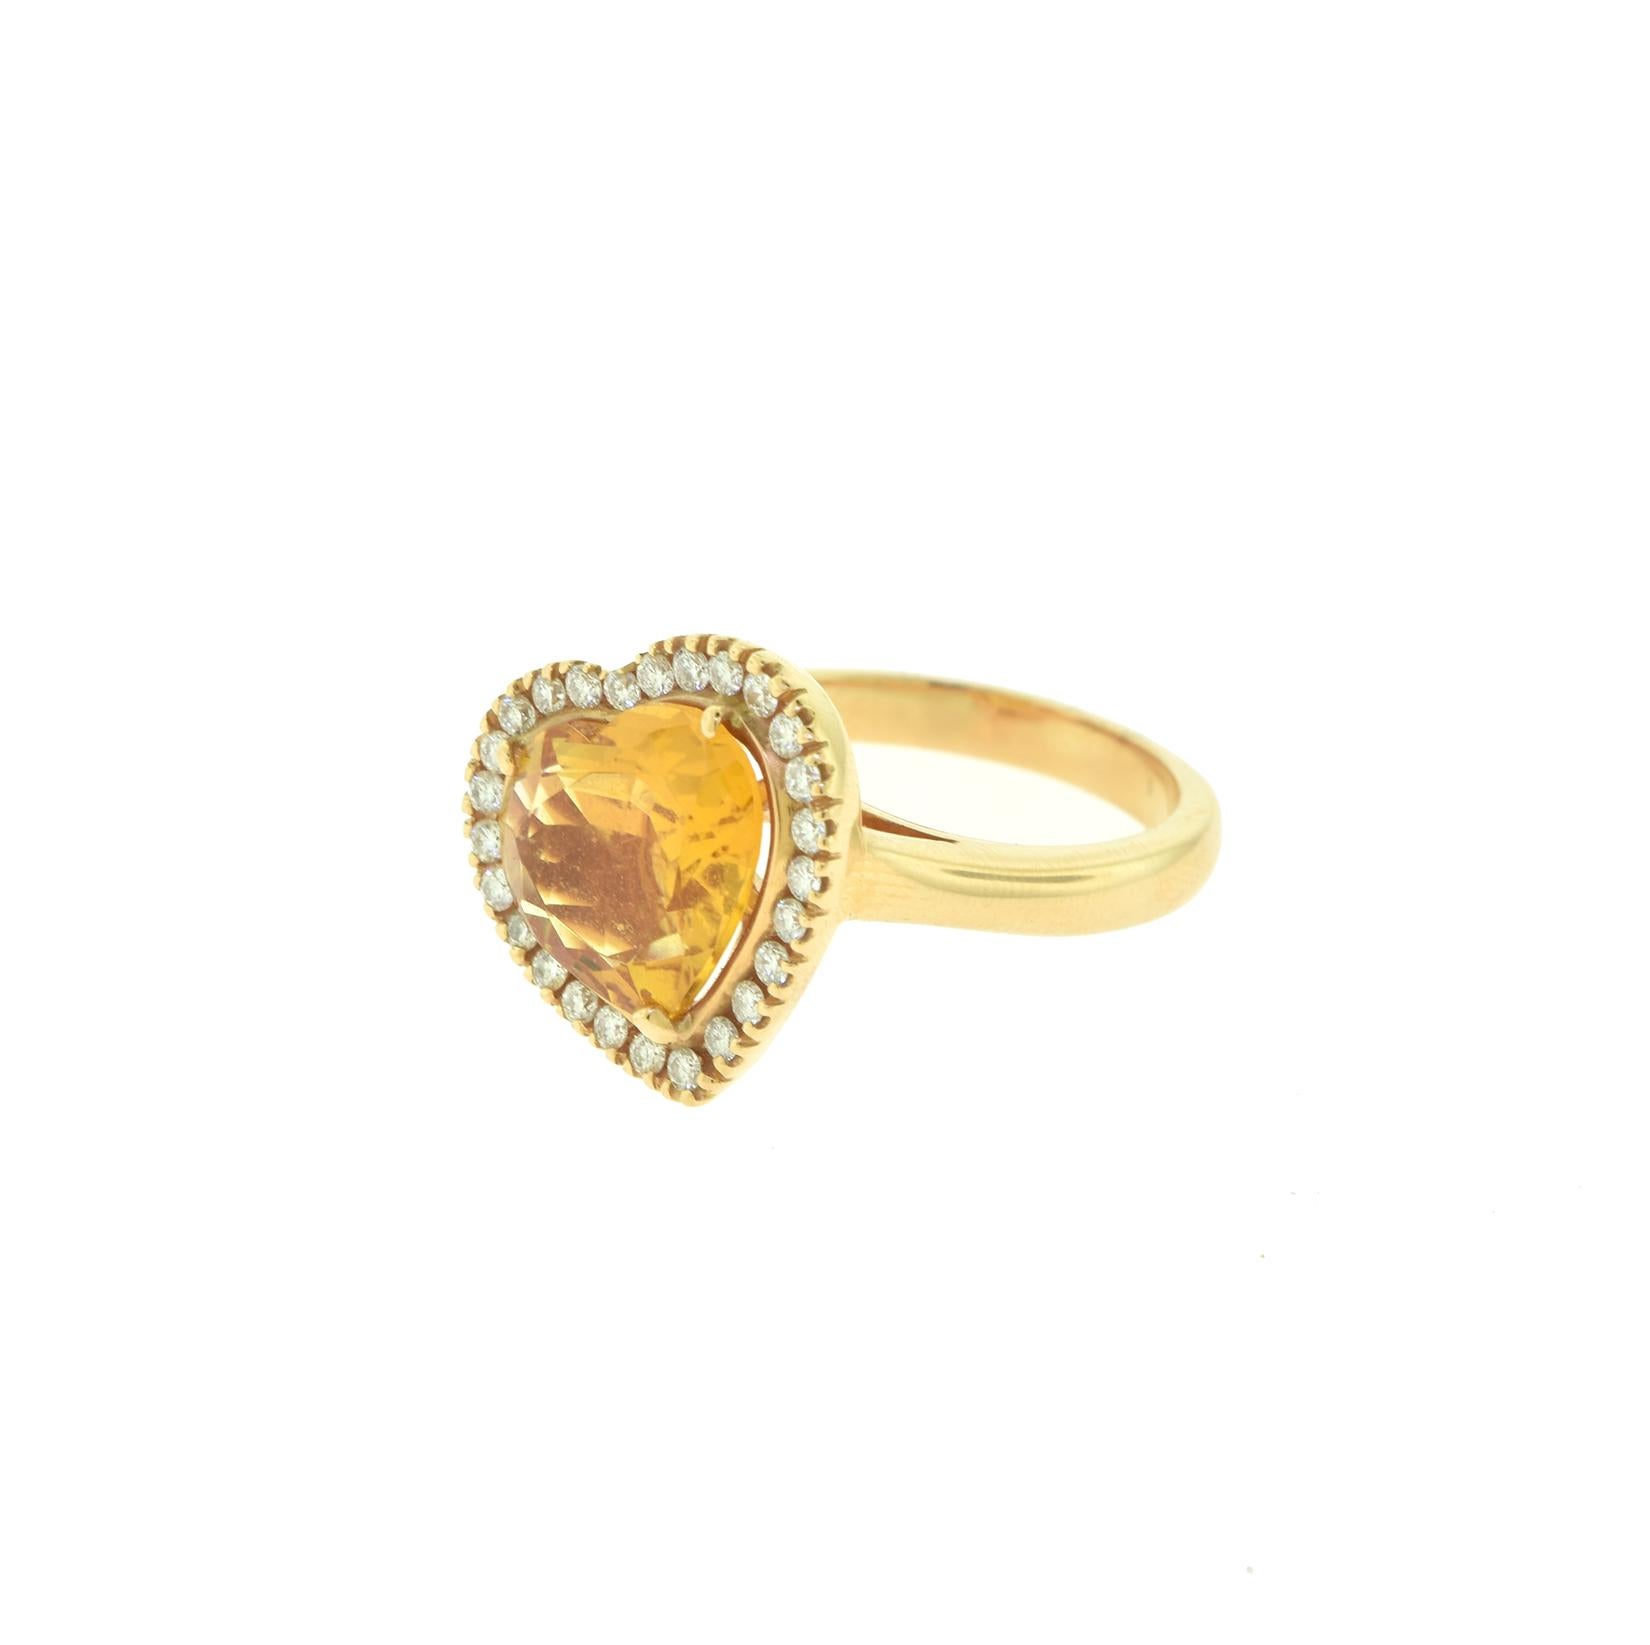 Brilliance Jewels, Miami
Questions? Call Us Anytime!
786,482,8100

Ring Size: 6.5  (this ring can be sized)

Metal:  Yellow Gold

Metal Purity: 18k

Ring Stones: 30 Round Brilliant Cut Diamonds

                             1 Large Heart-Shaped